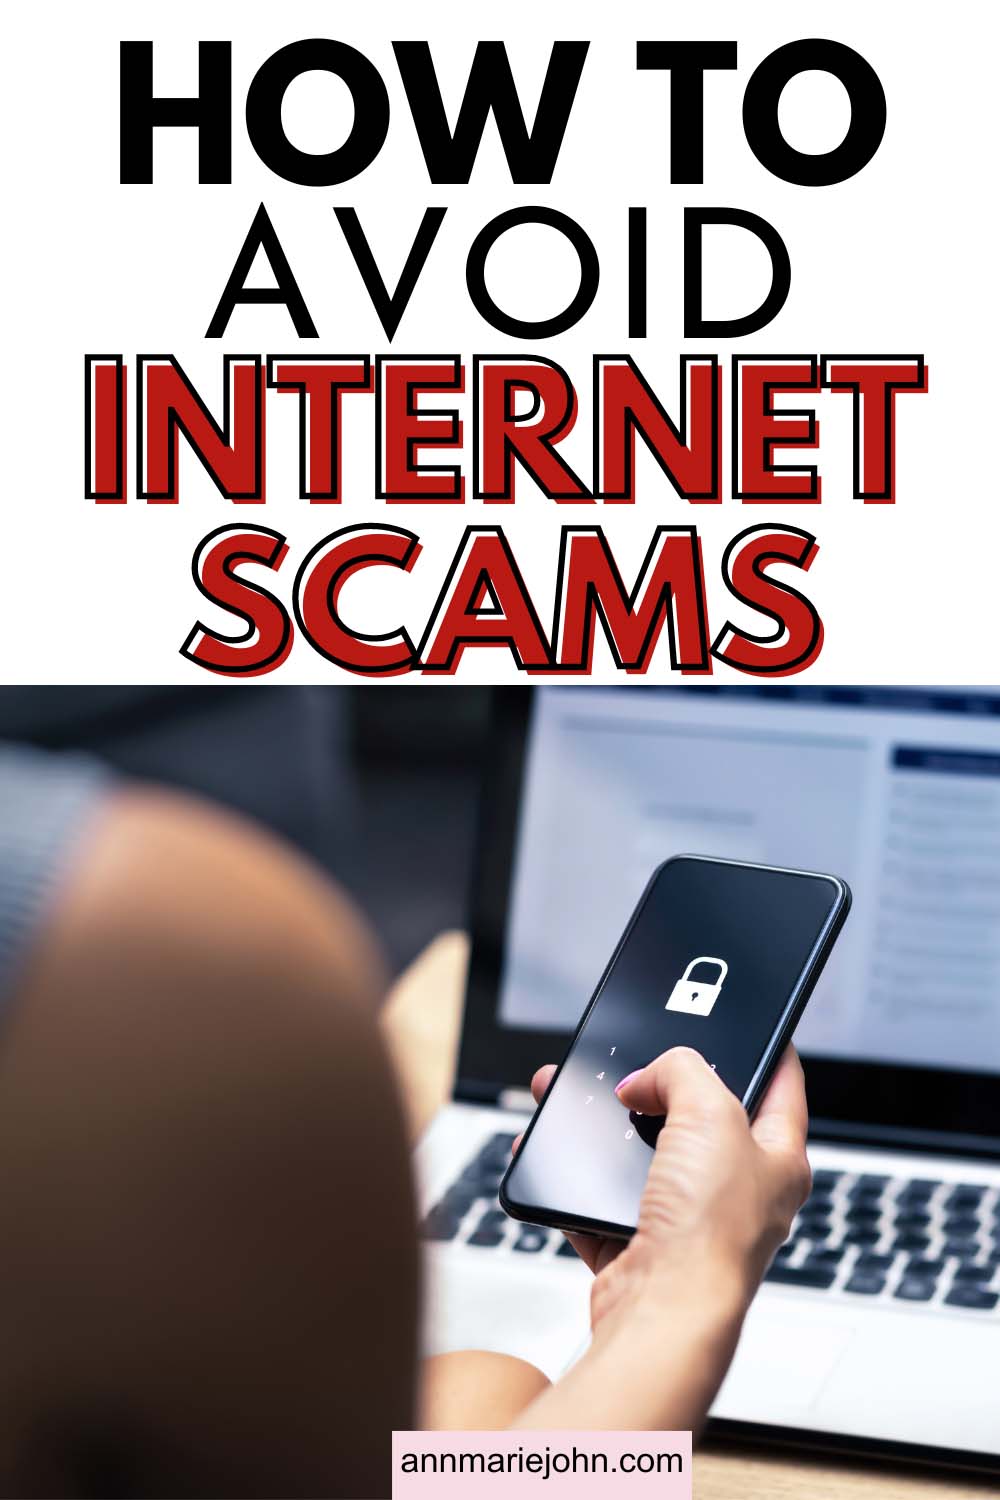 How to Avoid Internet Scams